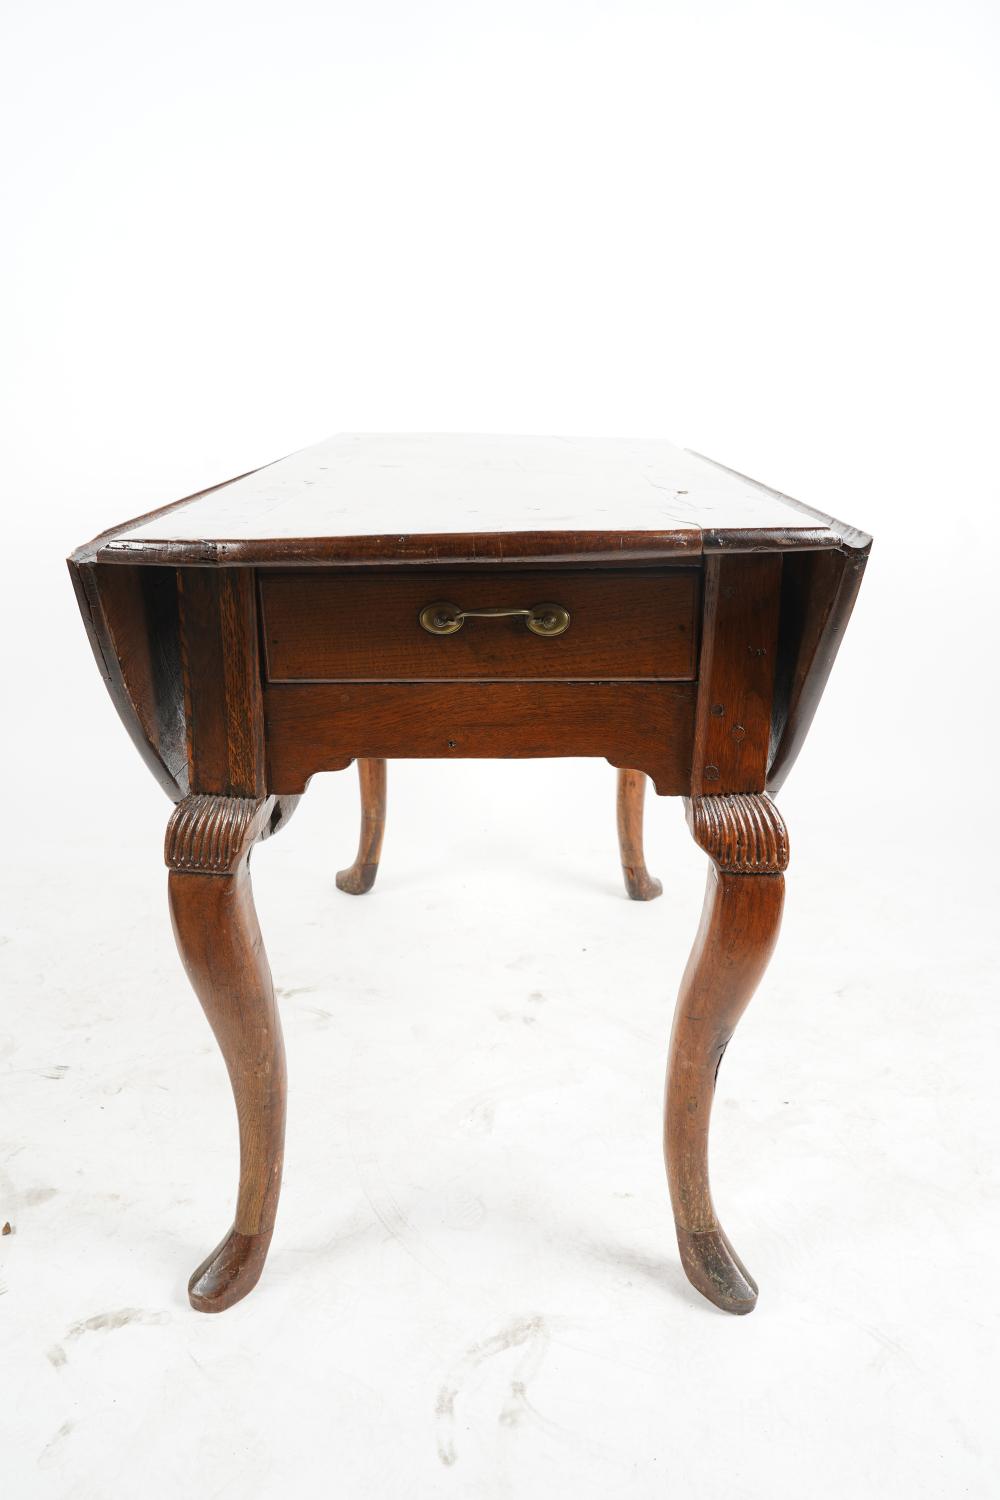 AF1-033: LATE 18TH C FRENCH PROVINCIAL OAK DROP LEAF TABLE  - NORMAN LEAR OWNED